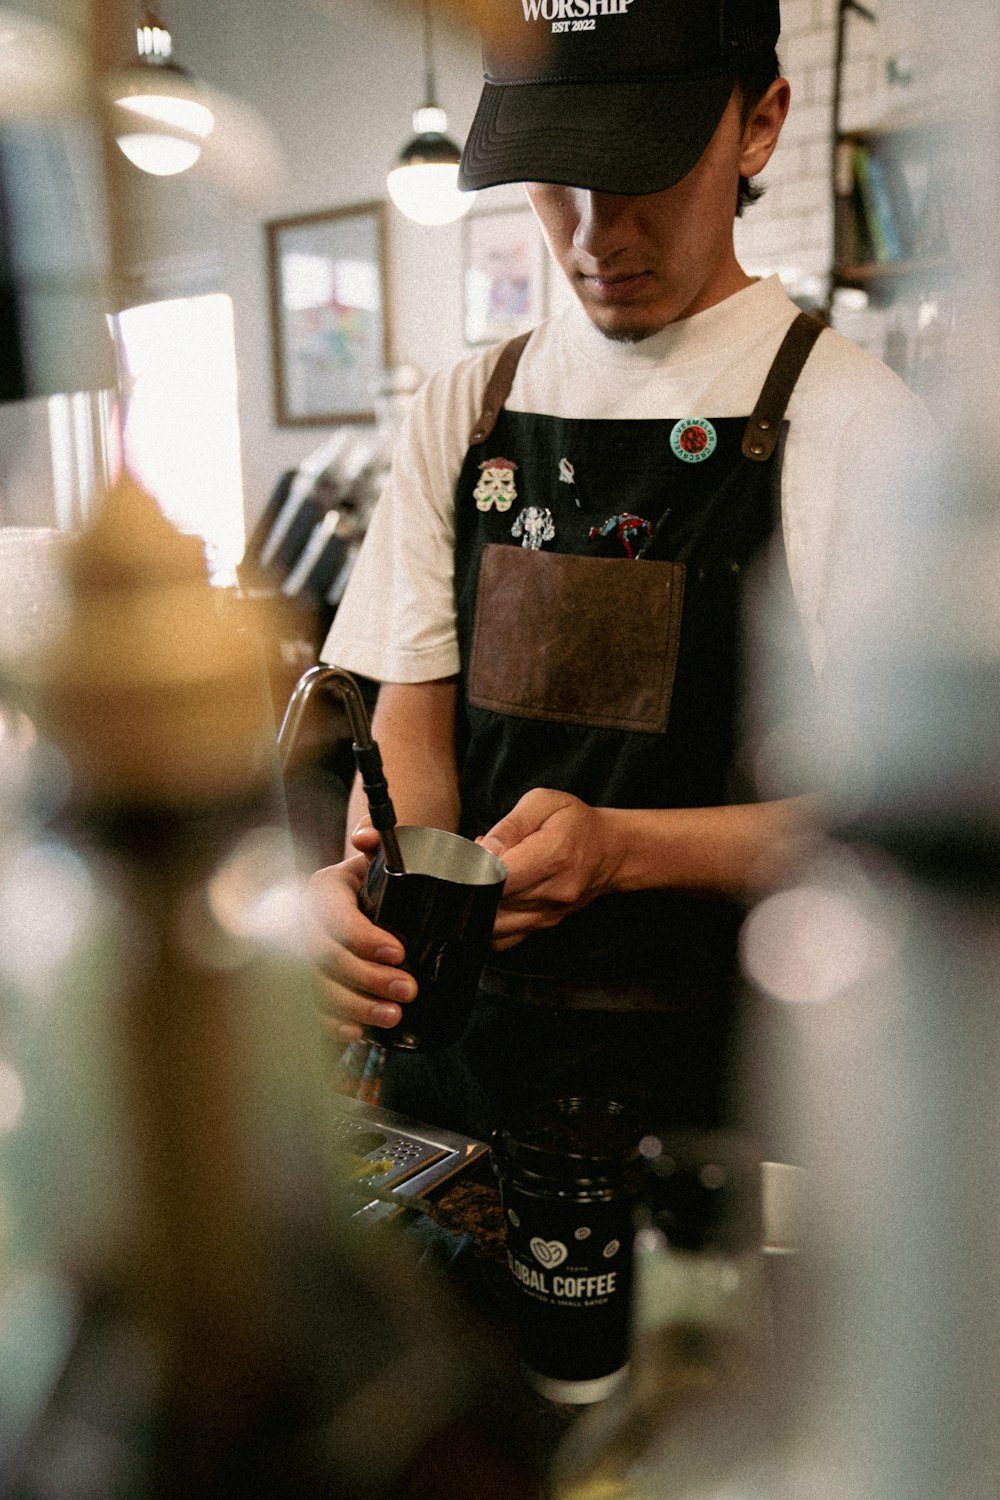 a man in an apron and hat is pouring a cup of coffee